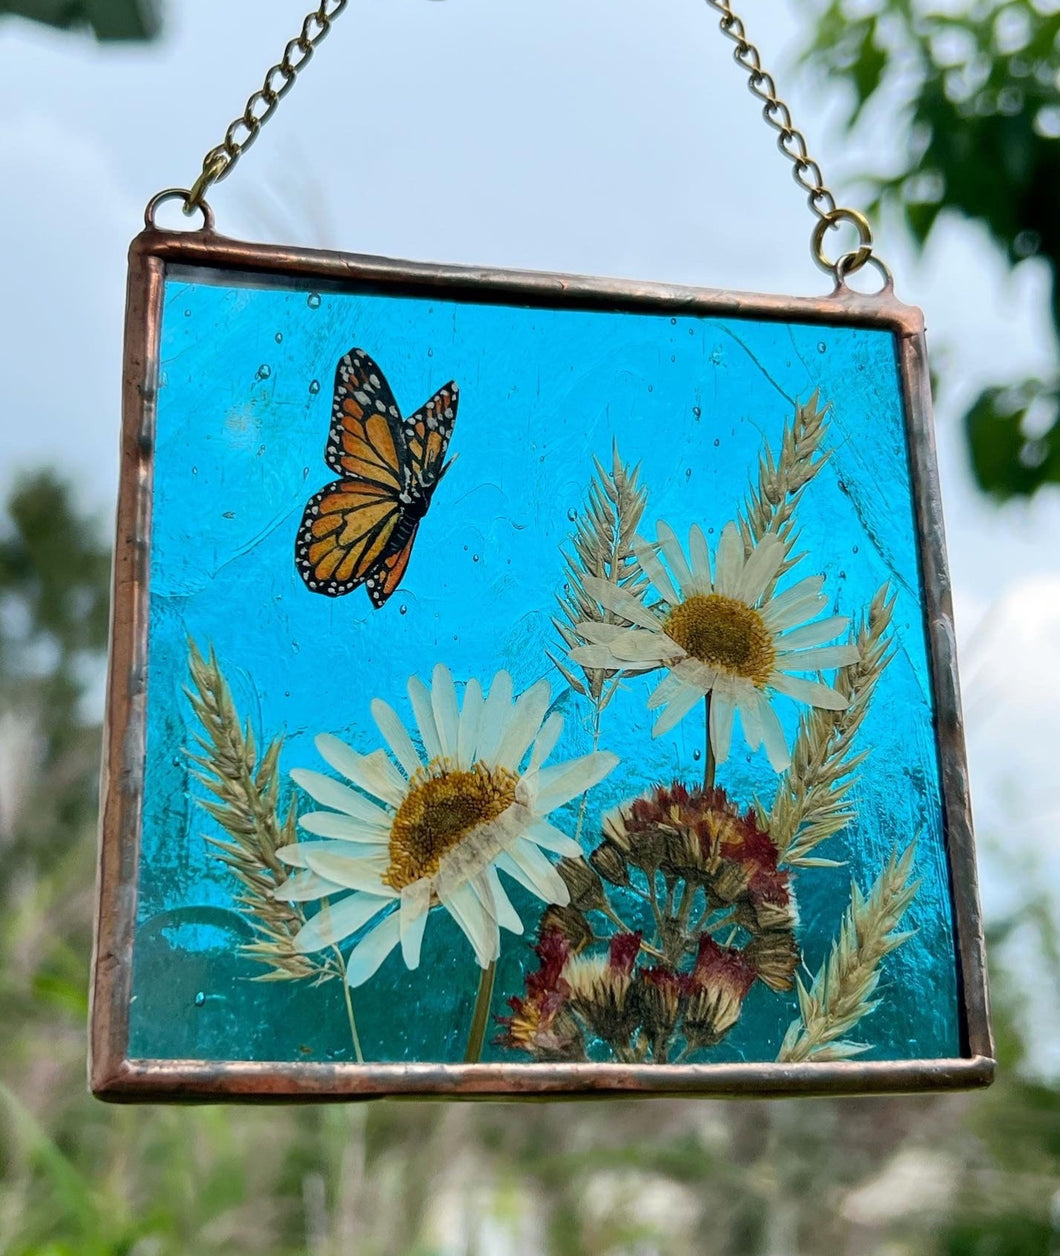 Monarch butterfly painted in gouache on paper with pressed shasta daisies, orange hawkweed, and wild grasses with transparent blue glass backing. Square shape with gold hanging chain.